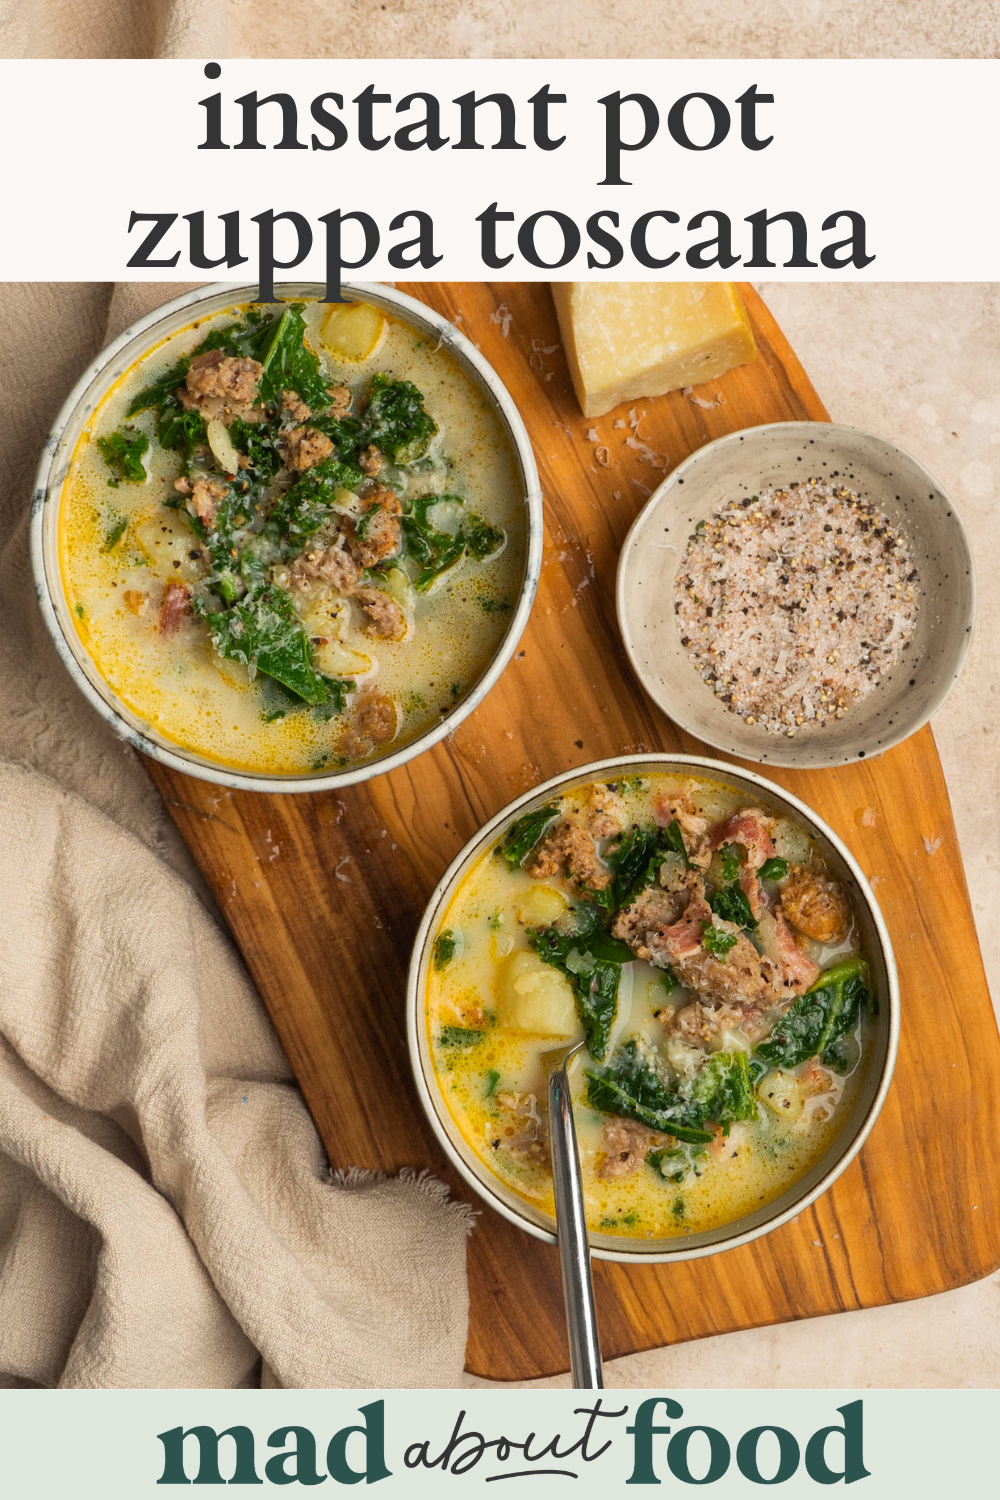 Image for pinning Instant Pot Zuppa Toscana on Pinterest